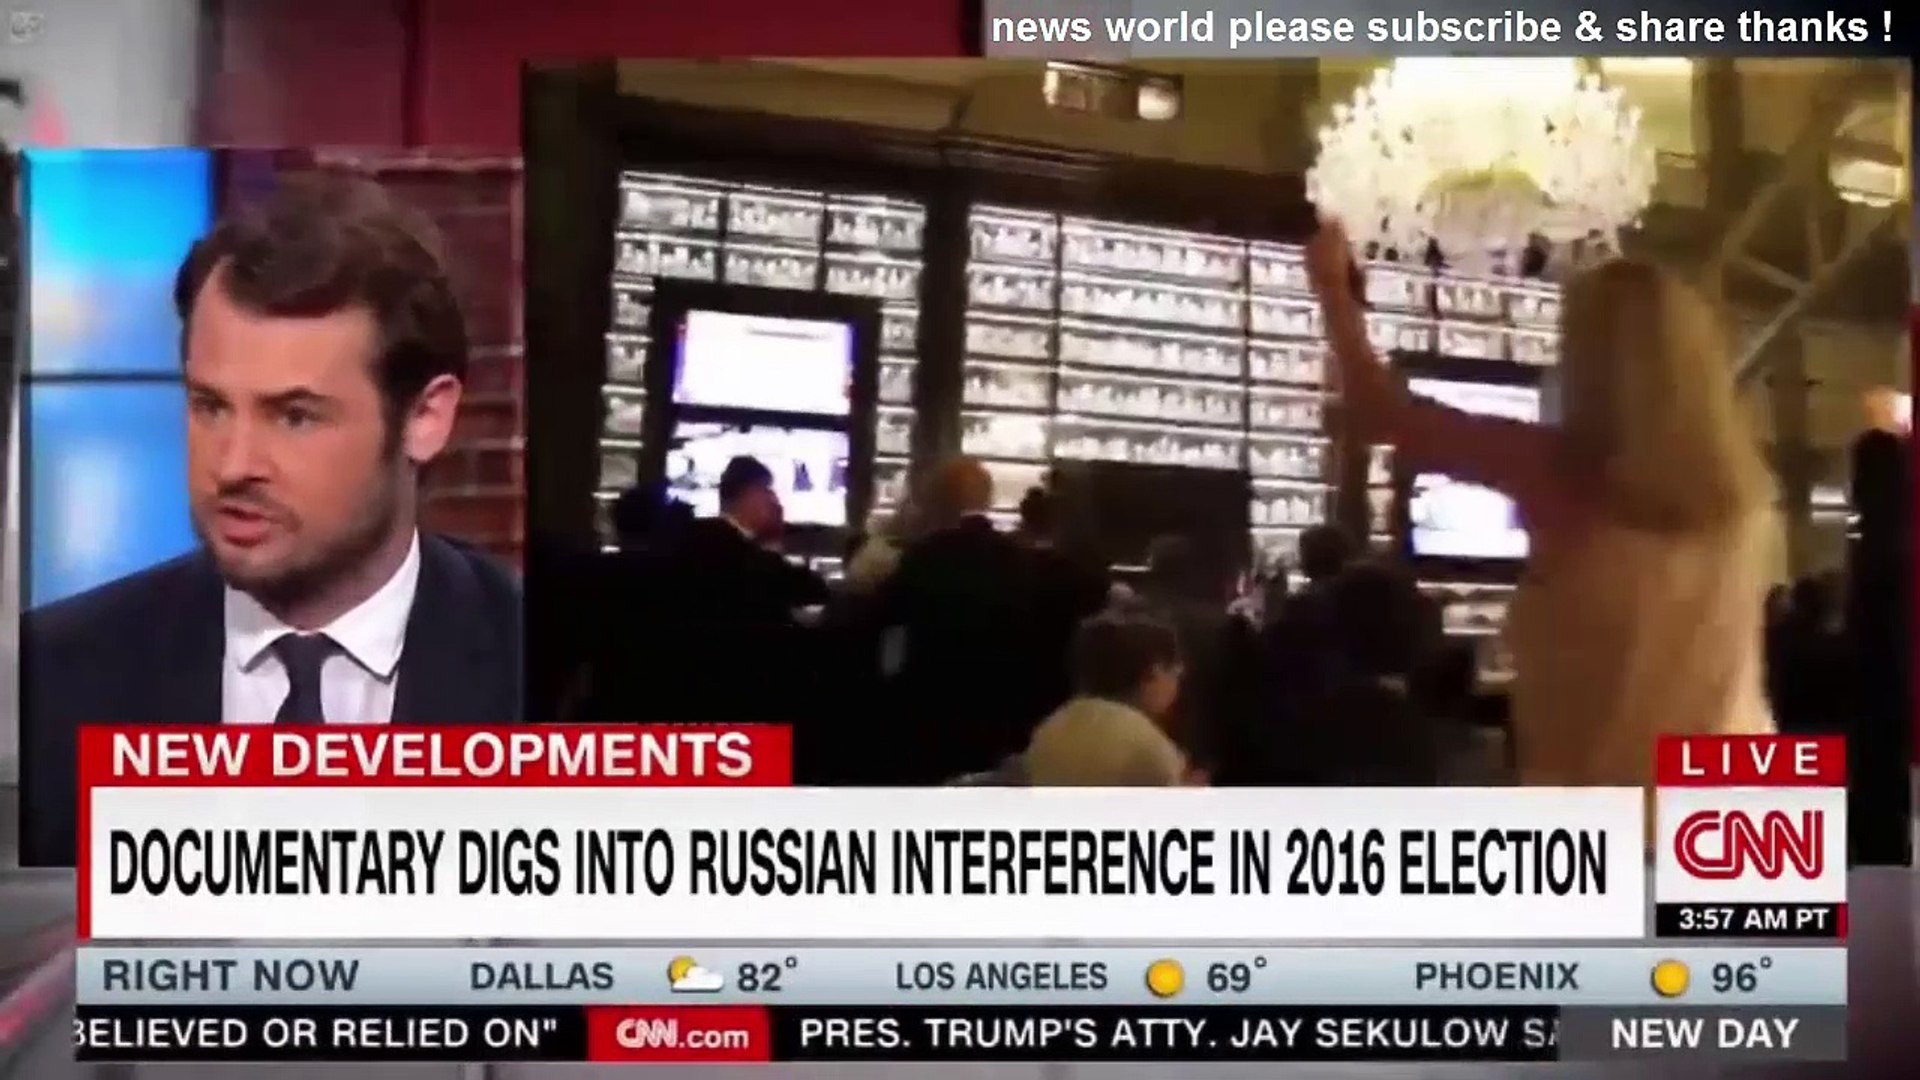 BREAKING NEWS DOCUMENTARY DIGS INTO RUSSIAN INTERFERENCE IN 2016 ELECTION. CNN NEWS